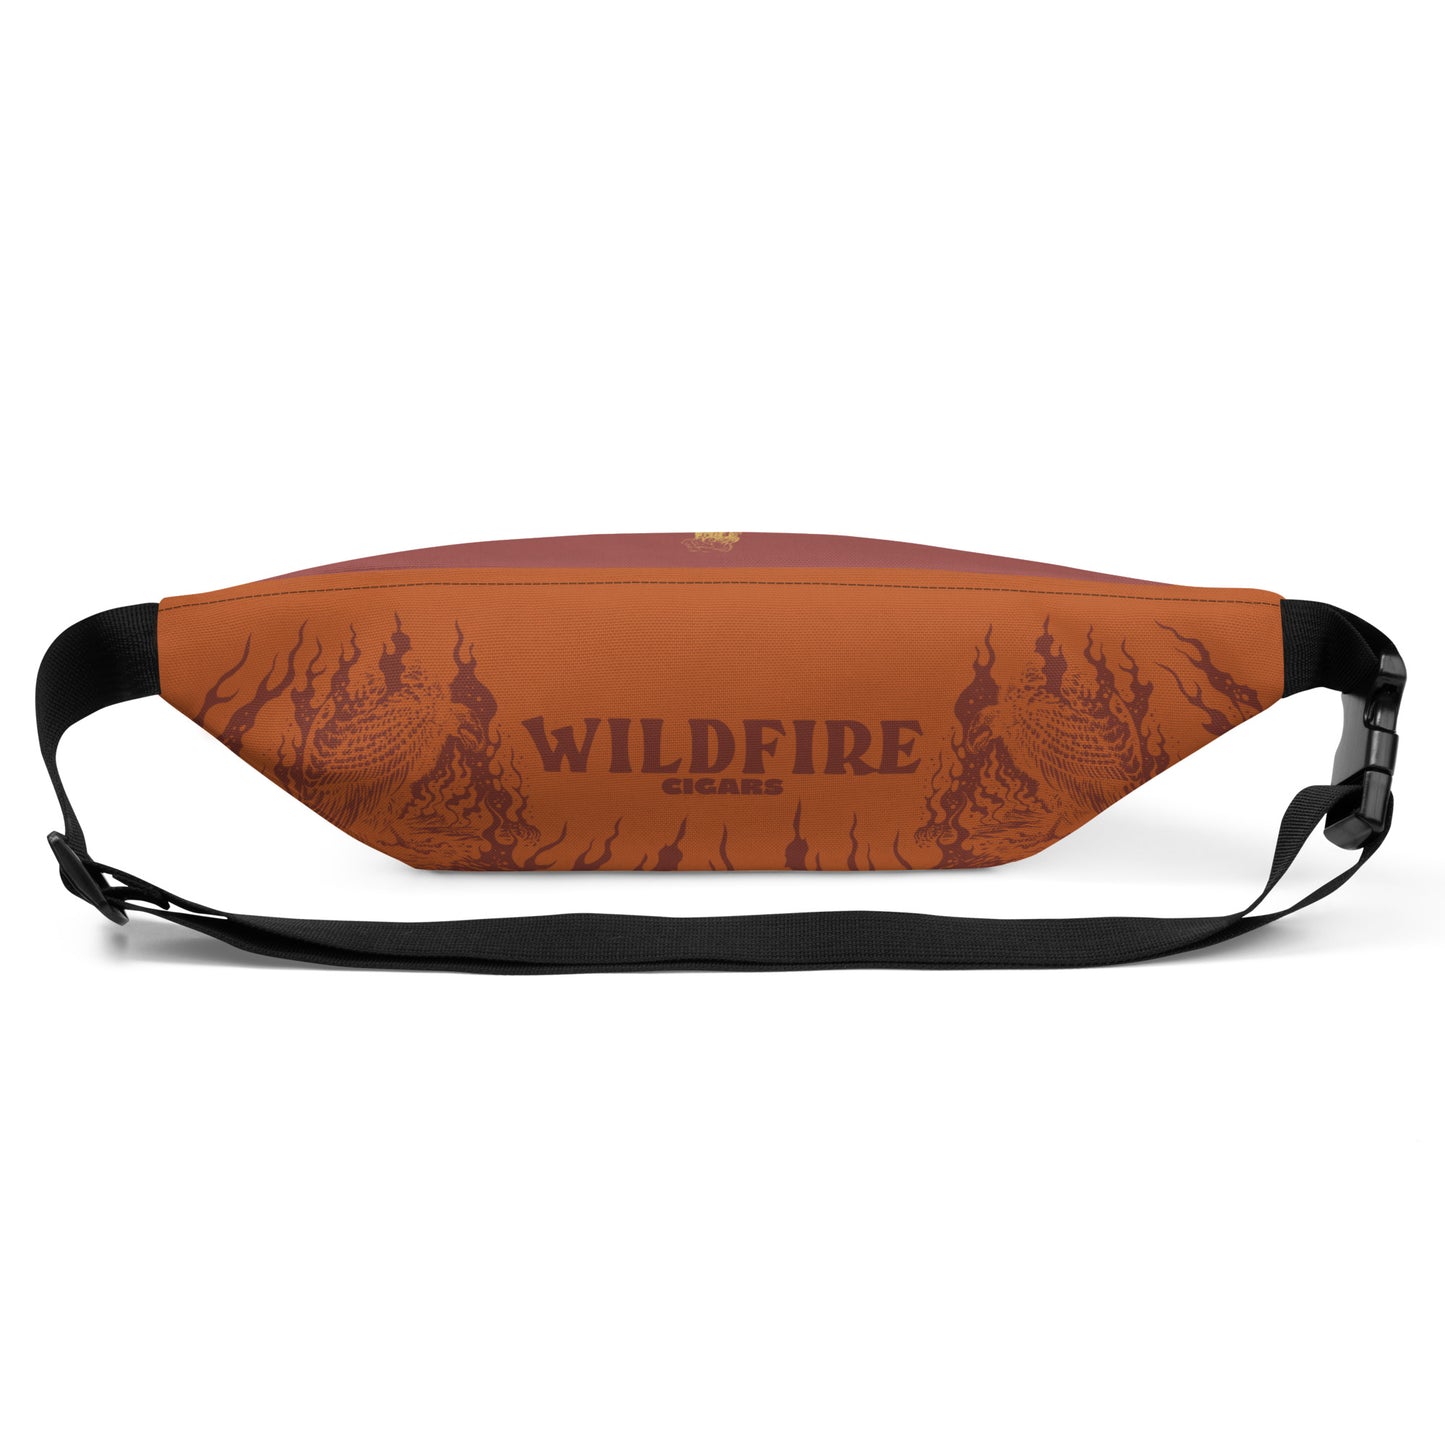 Wildfire Cigars Vulture fanny pack